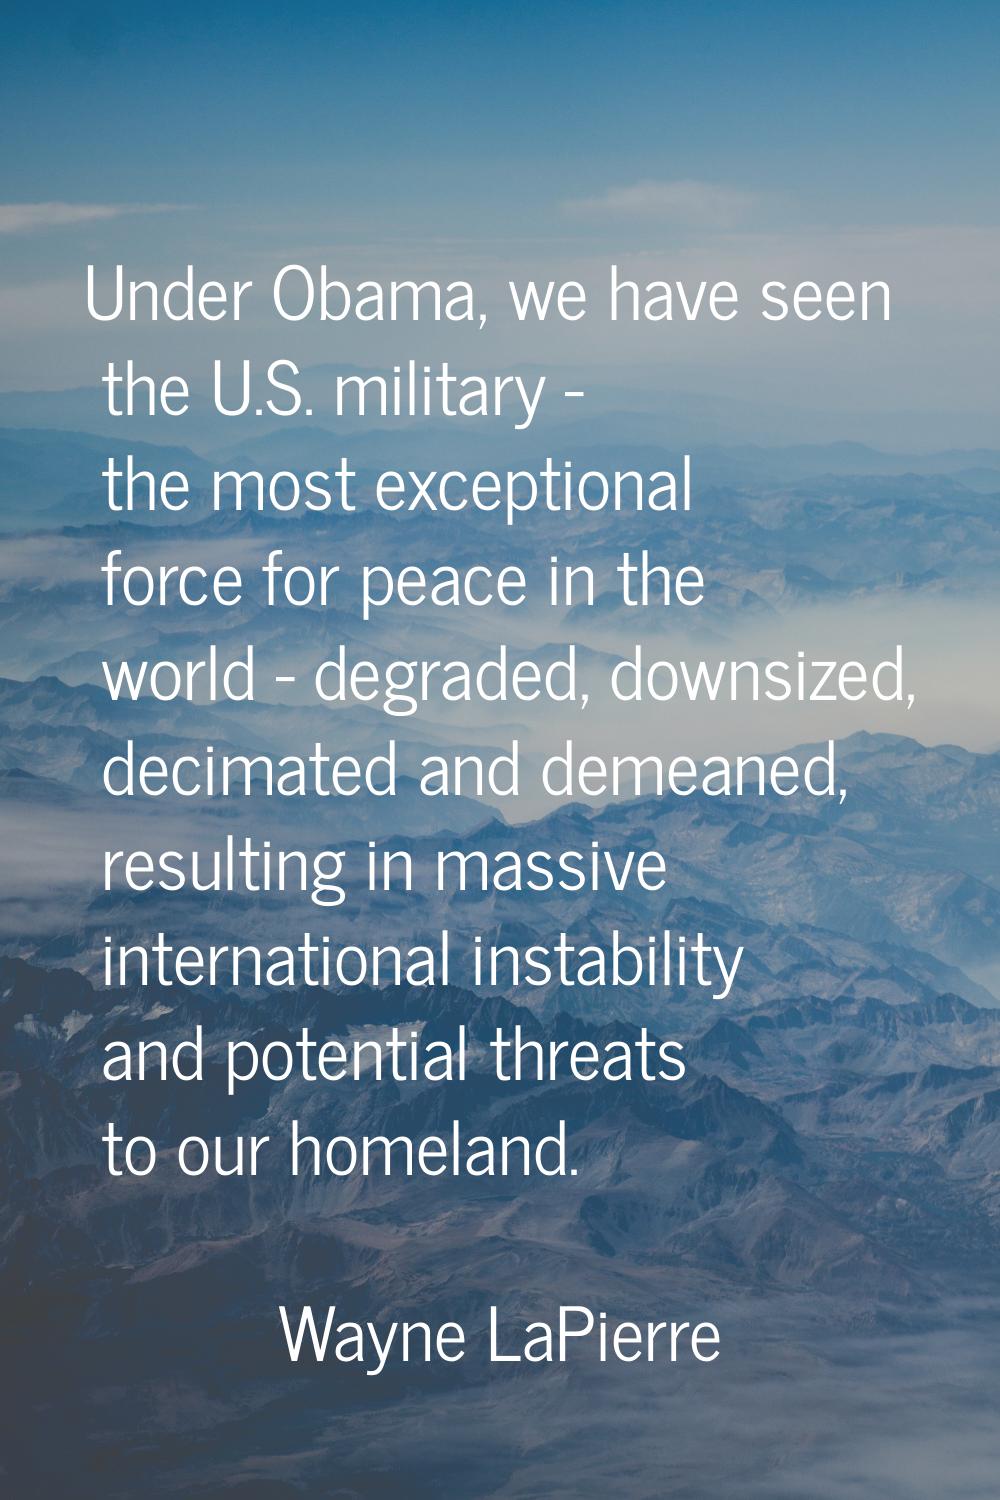 Under Obama, we have seen the U.S. military - the most exceptional force for peace in the world - d